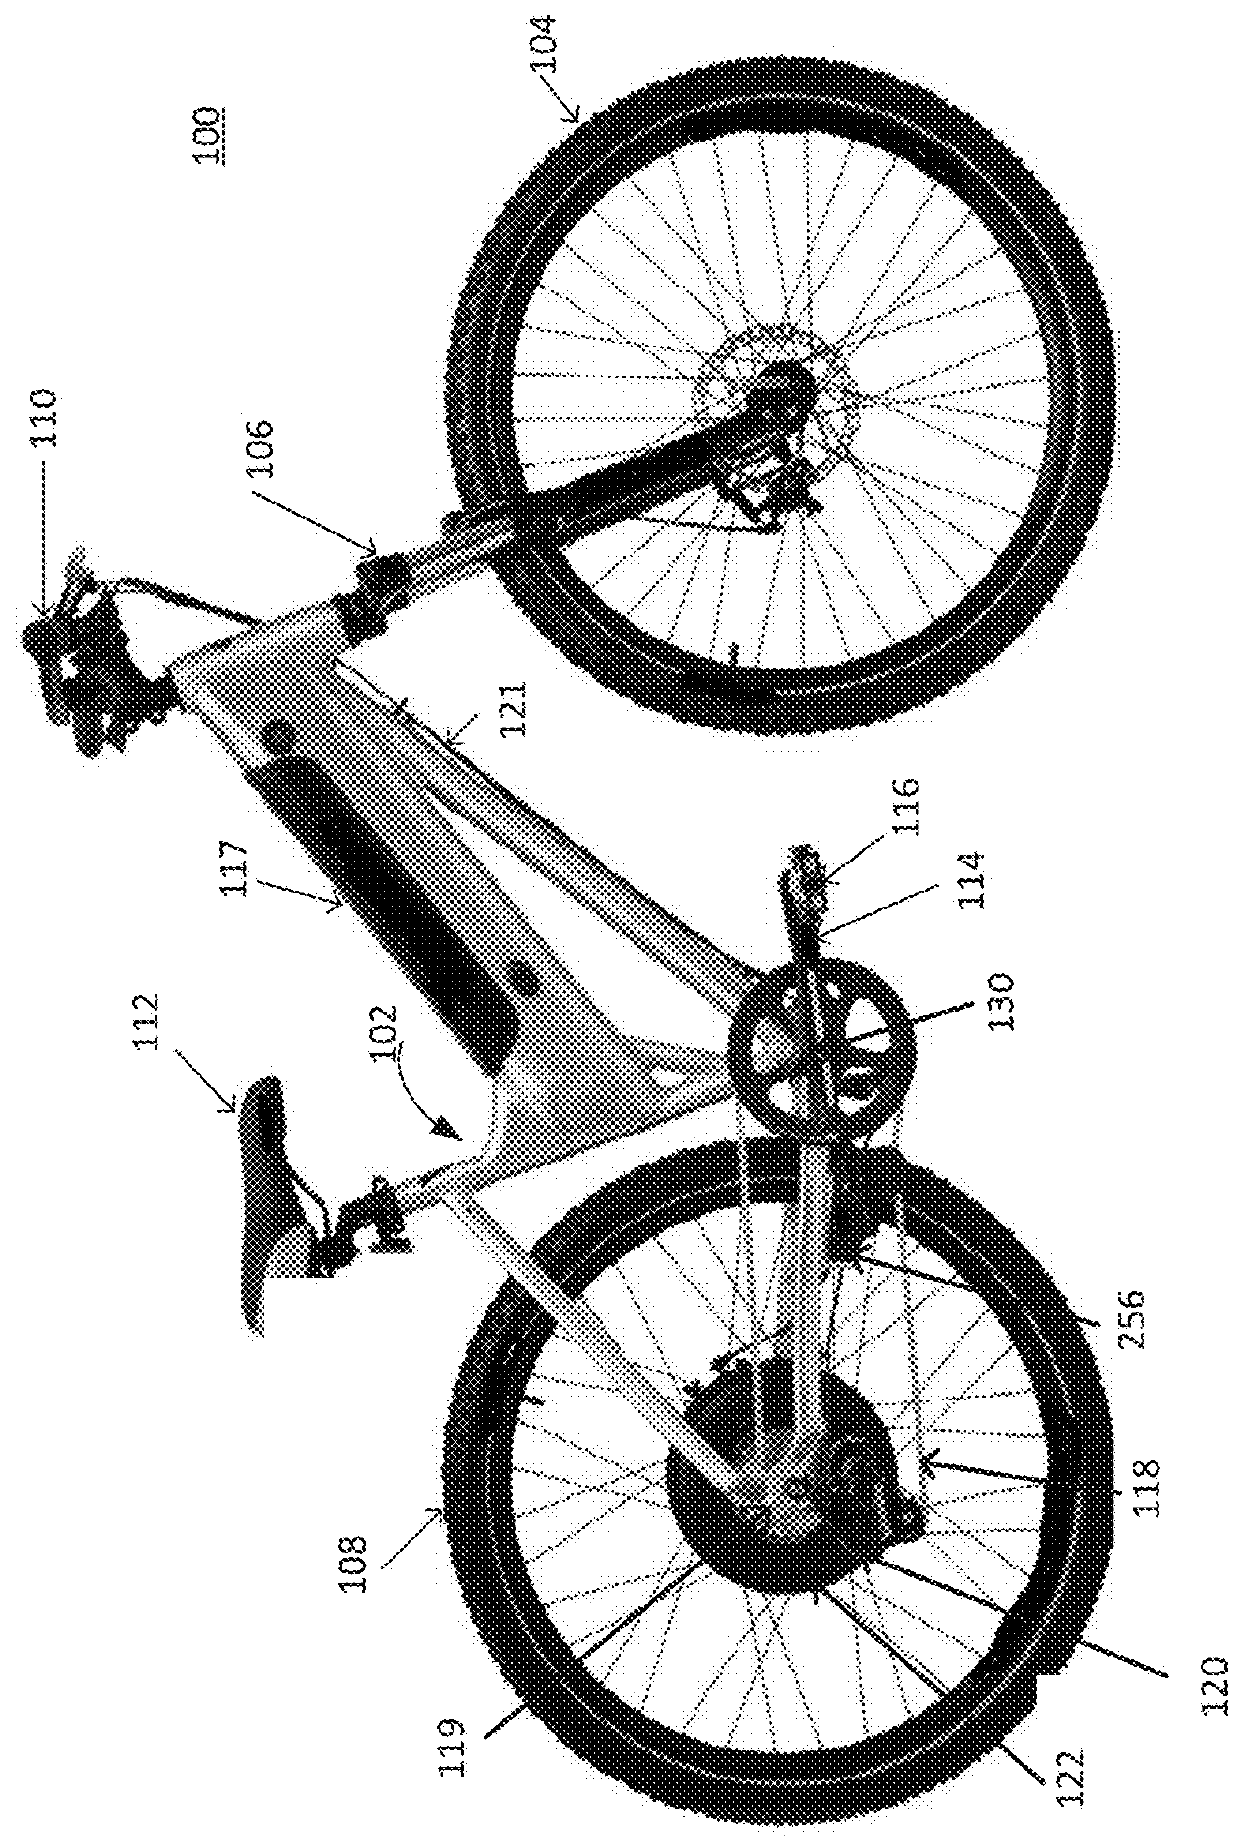 Motorized bicycle with electronic speed controlled gears